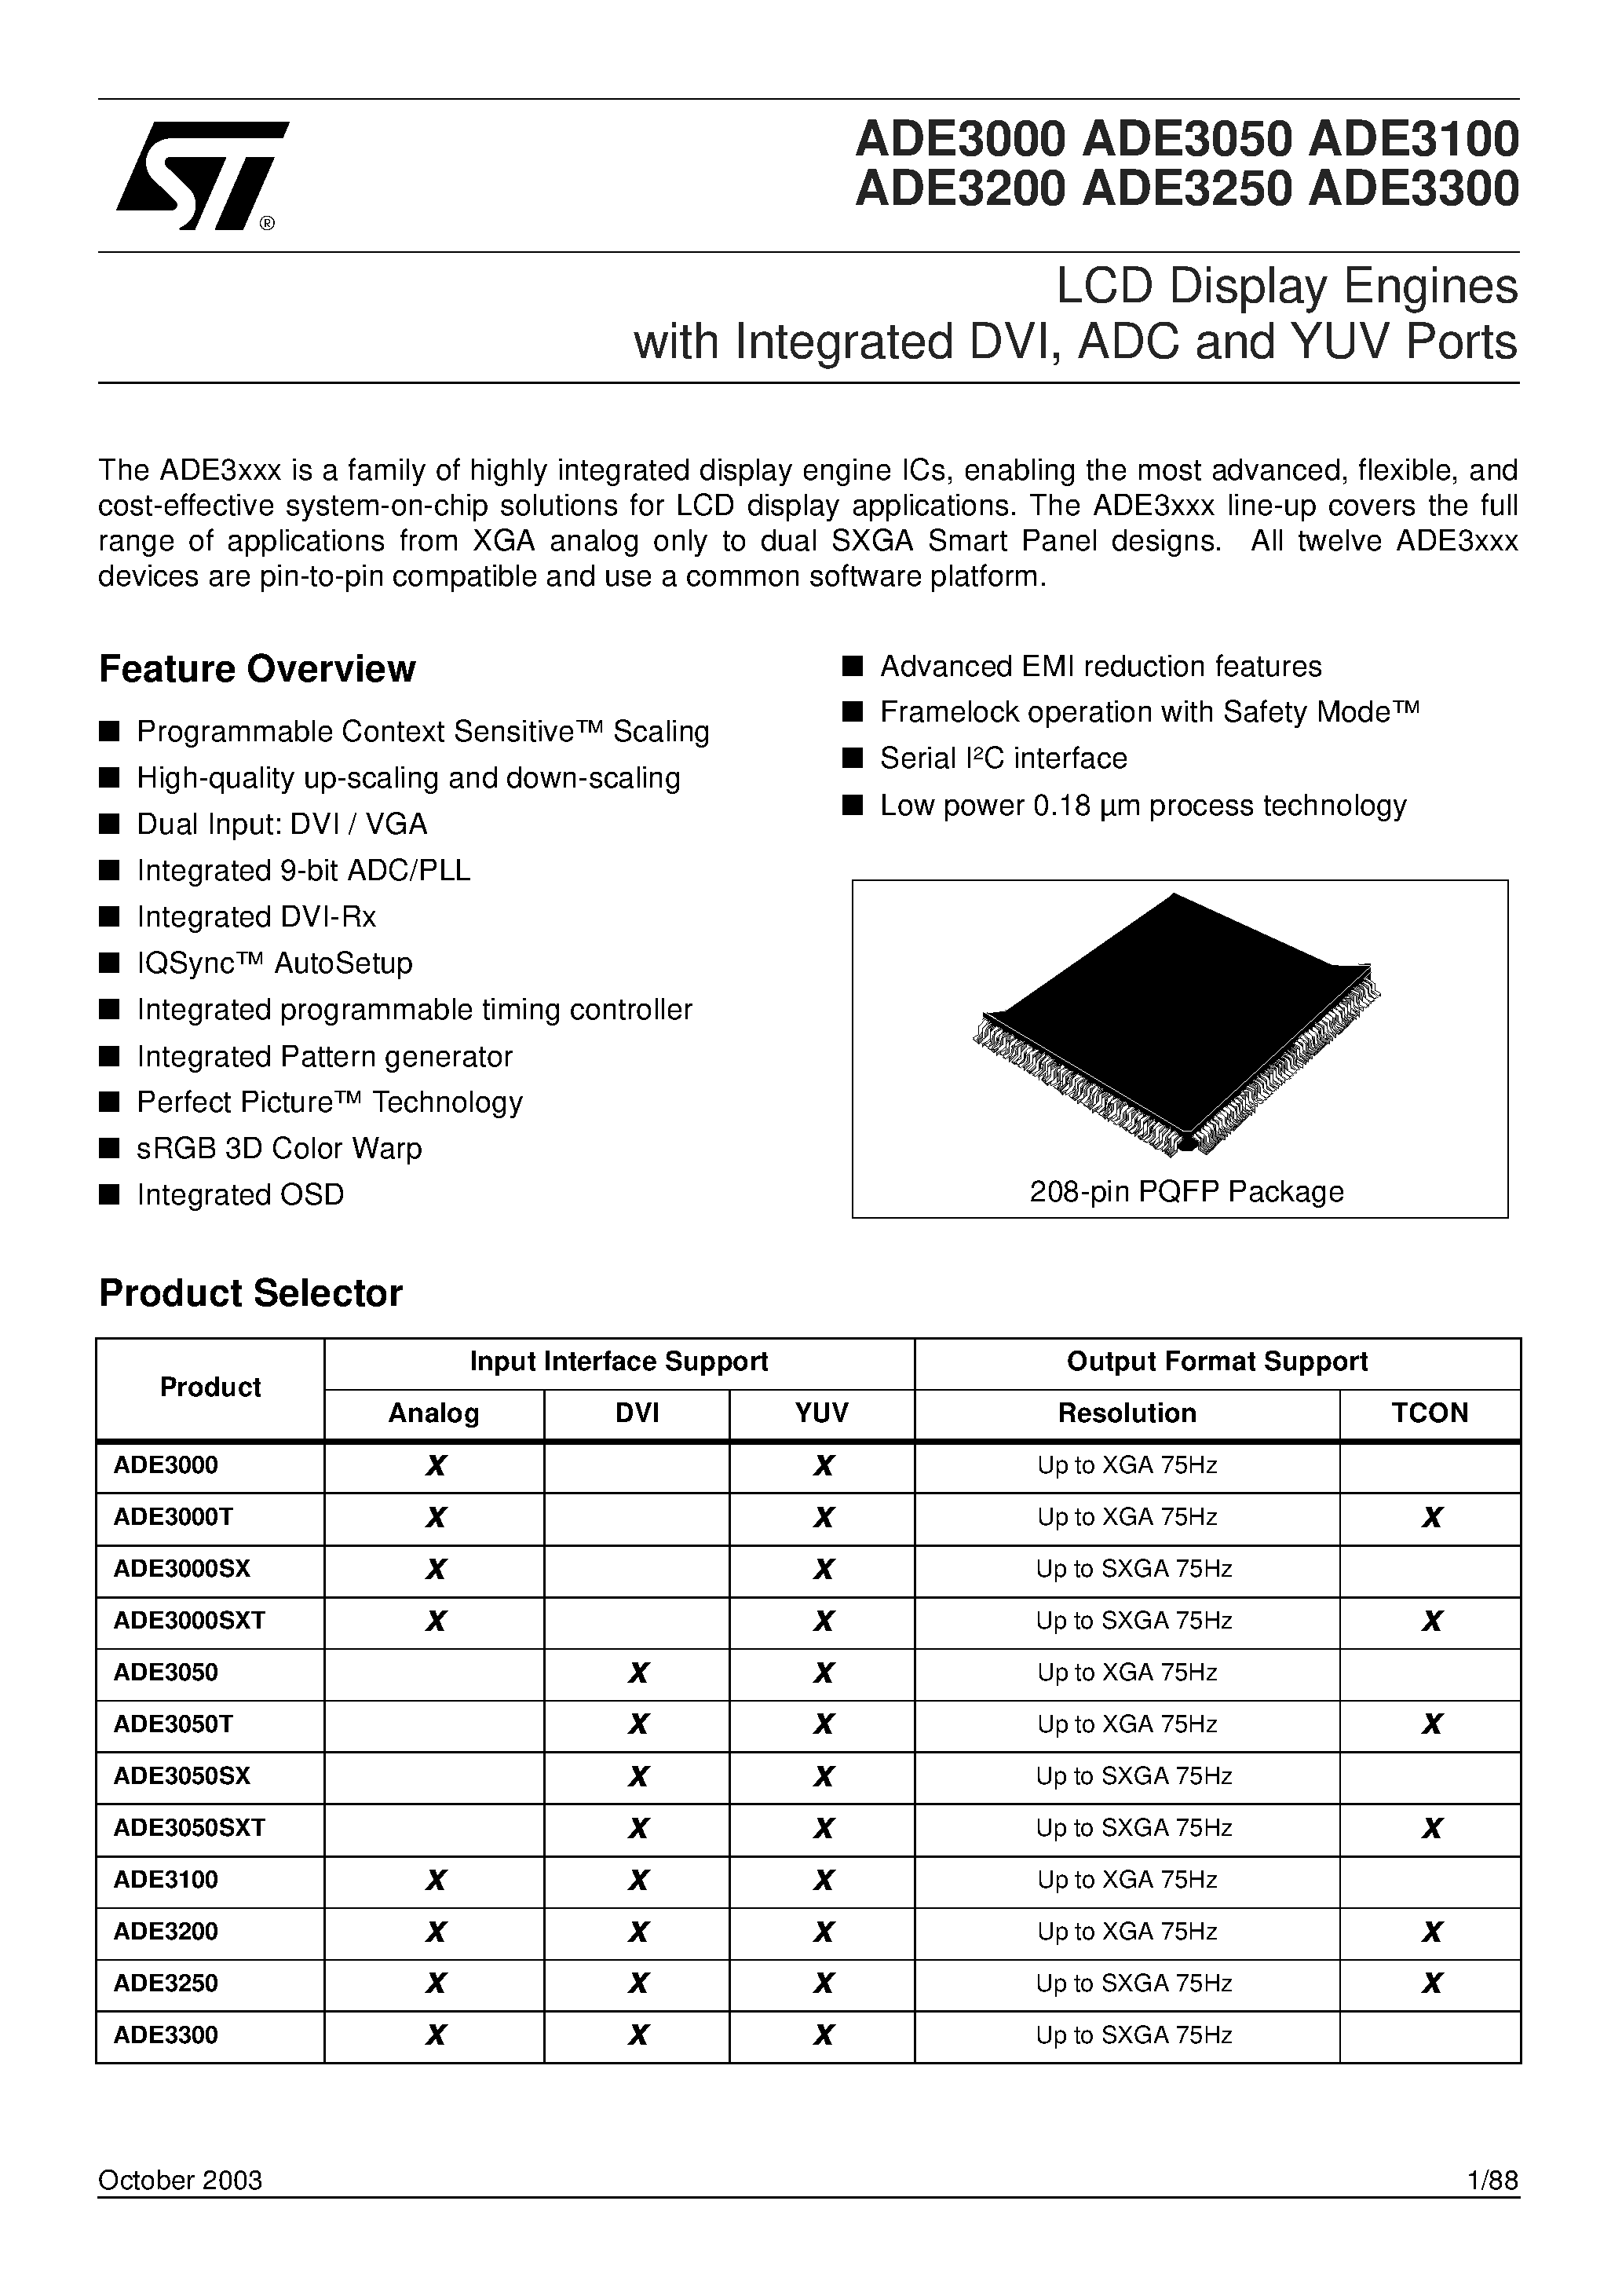 Datasheet ADE3250 - LCD Display Engines with Integrated DVI/ ADC and YUV Ports page 1